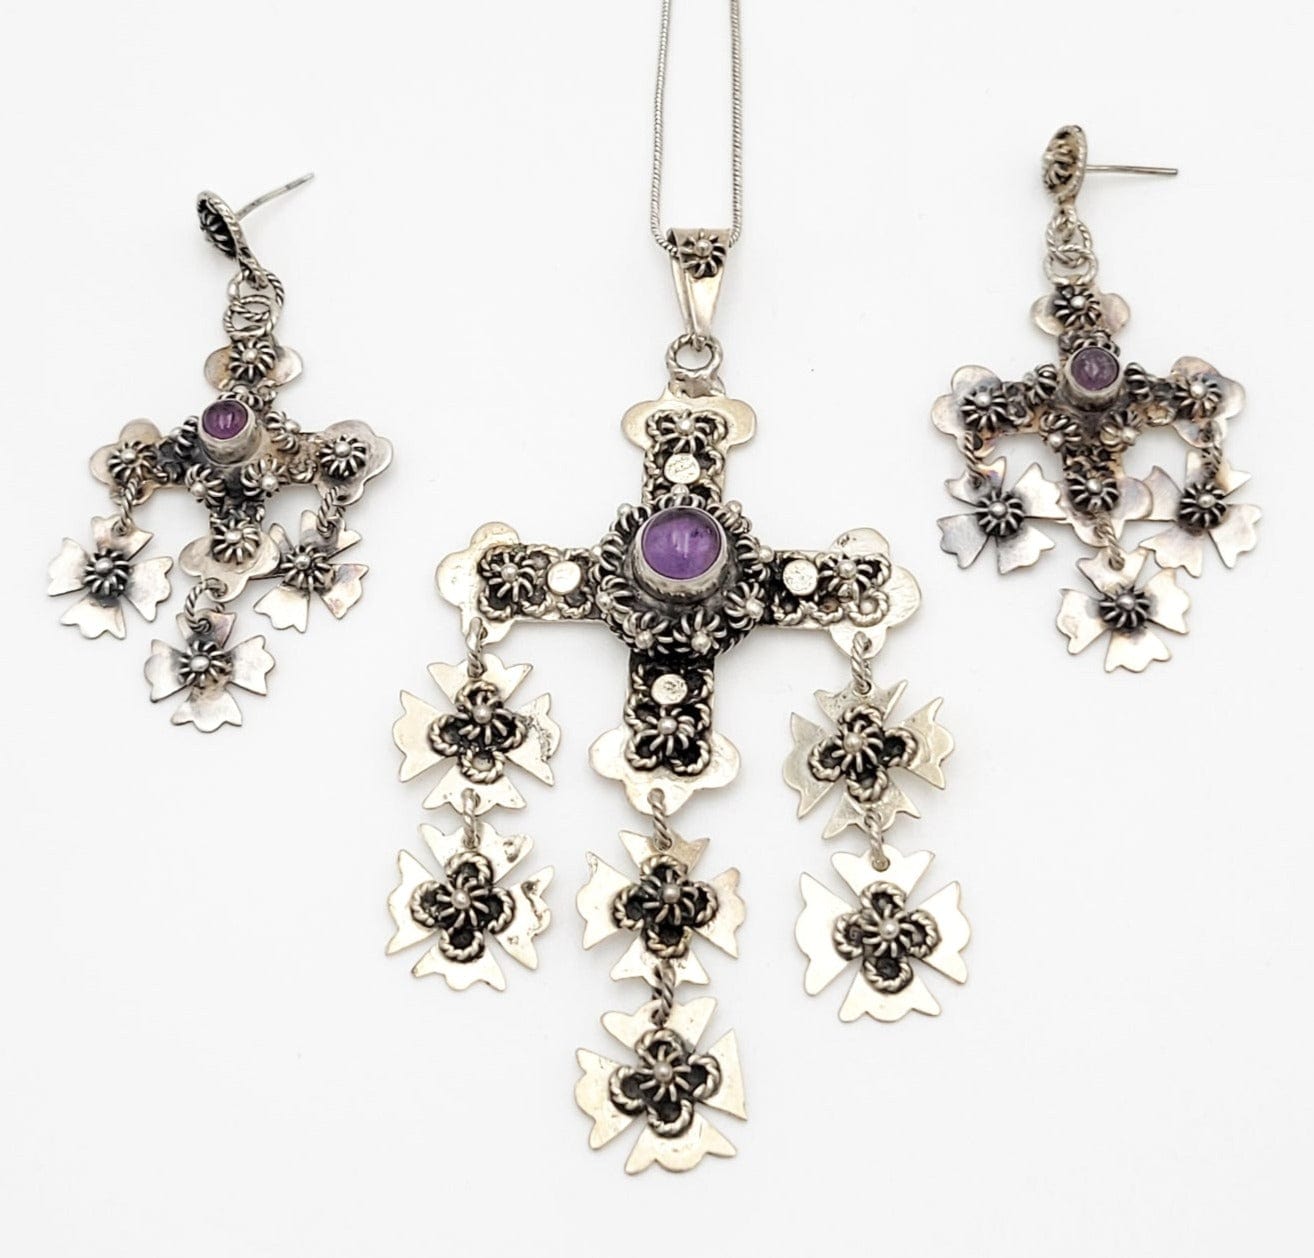 Taxco Jewelry Taxco Sterling & Amethyst Monumental Yalalag Necklace Earrings SET Circa 1980s